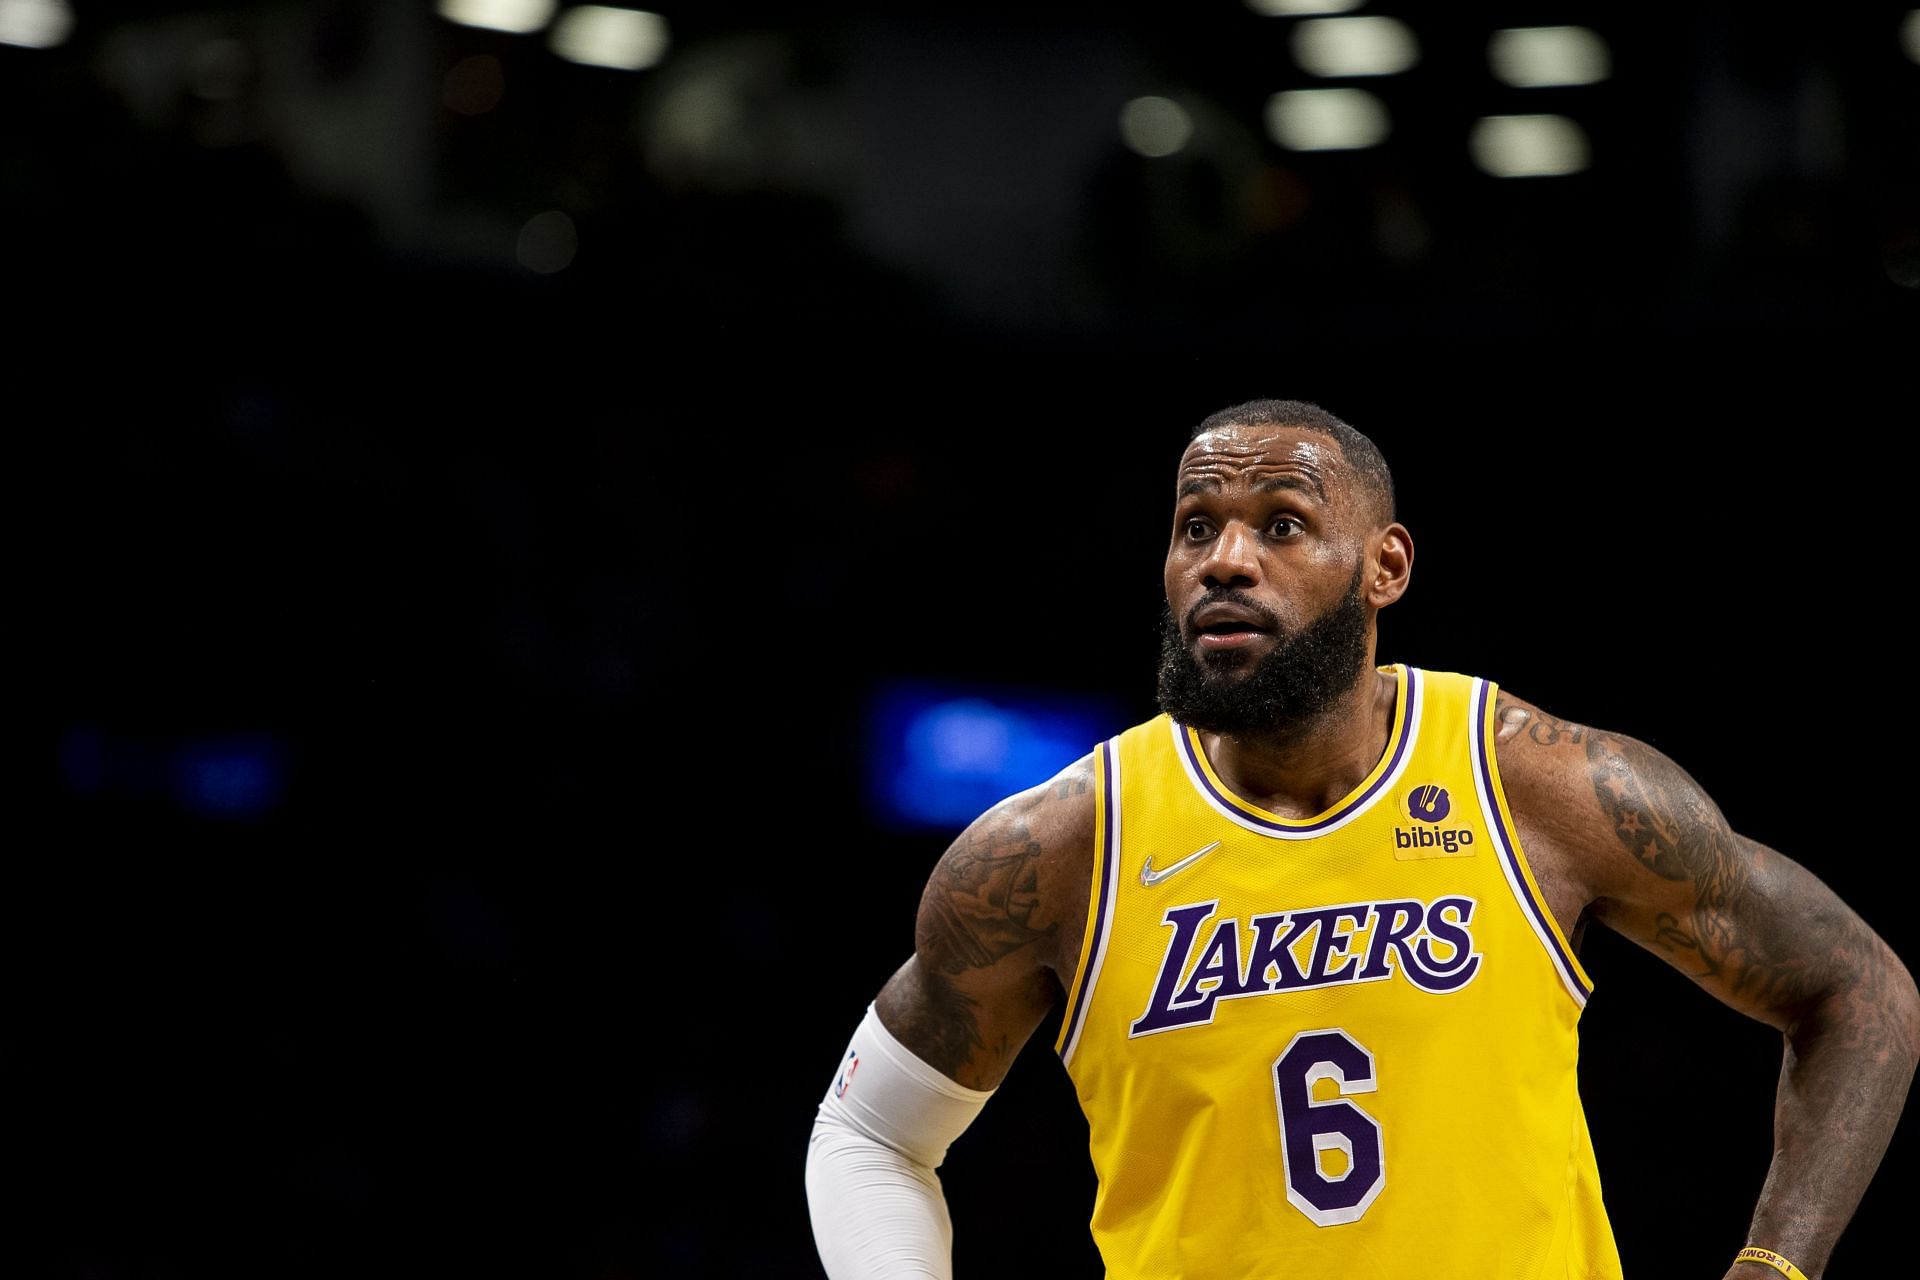 LeBron James of the LA Lakers against the Brooklyn Nets